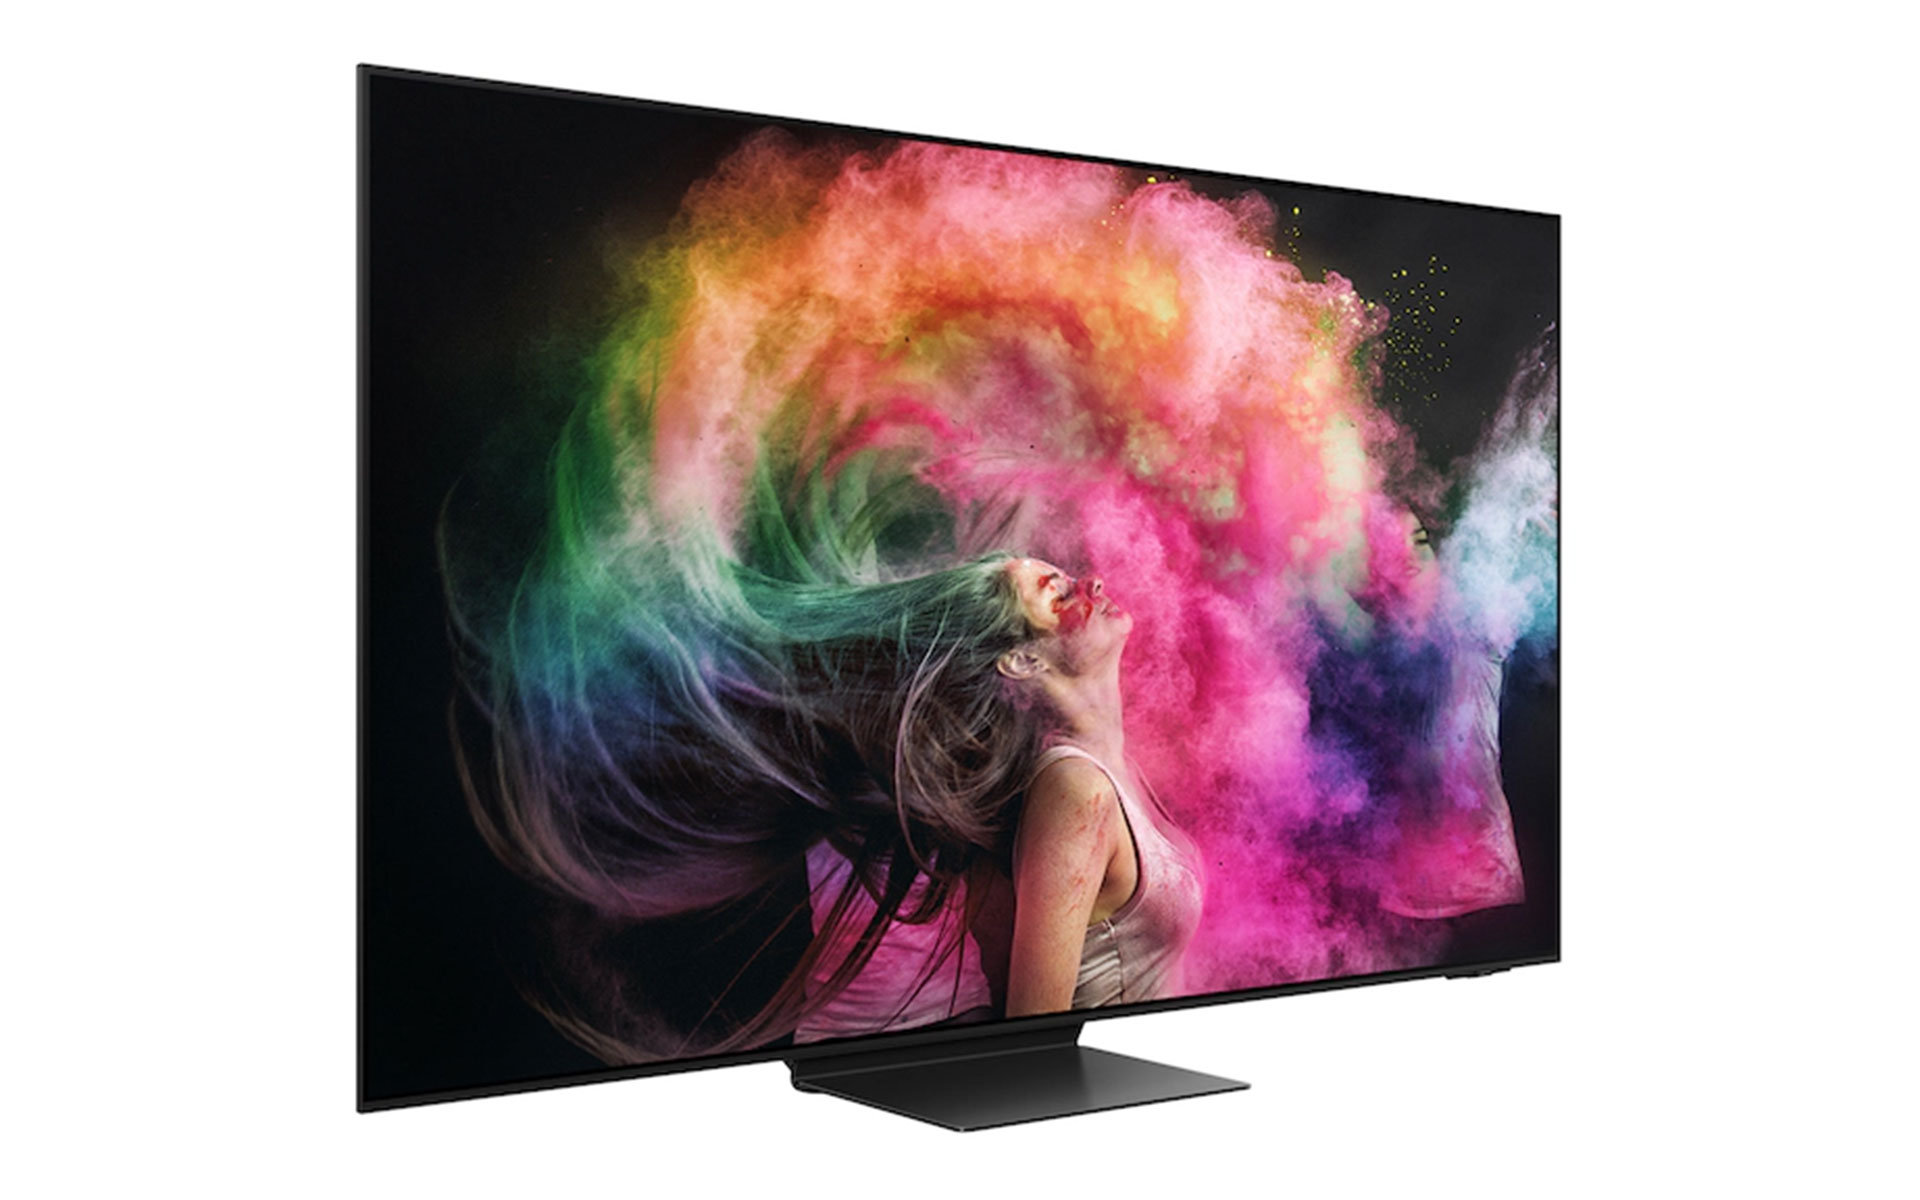 Samsung OLED 77” Television: Unleash the Power of Cutting-Edge Technology